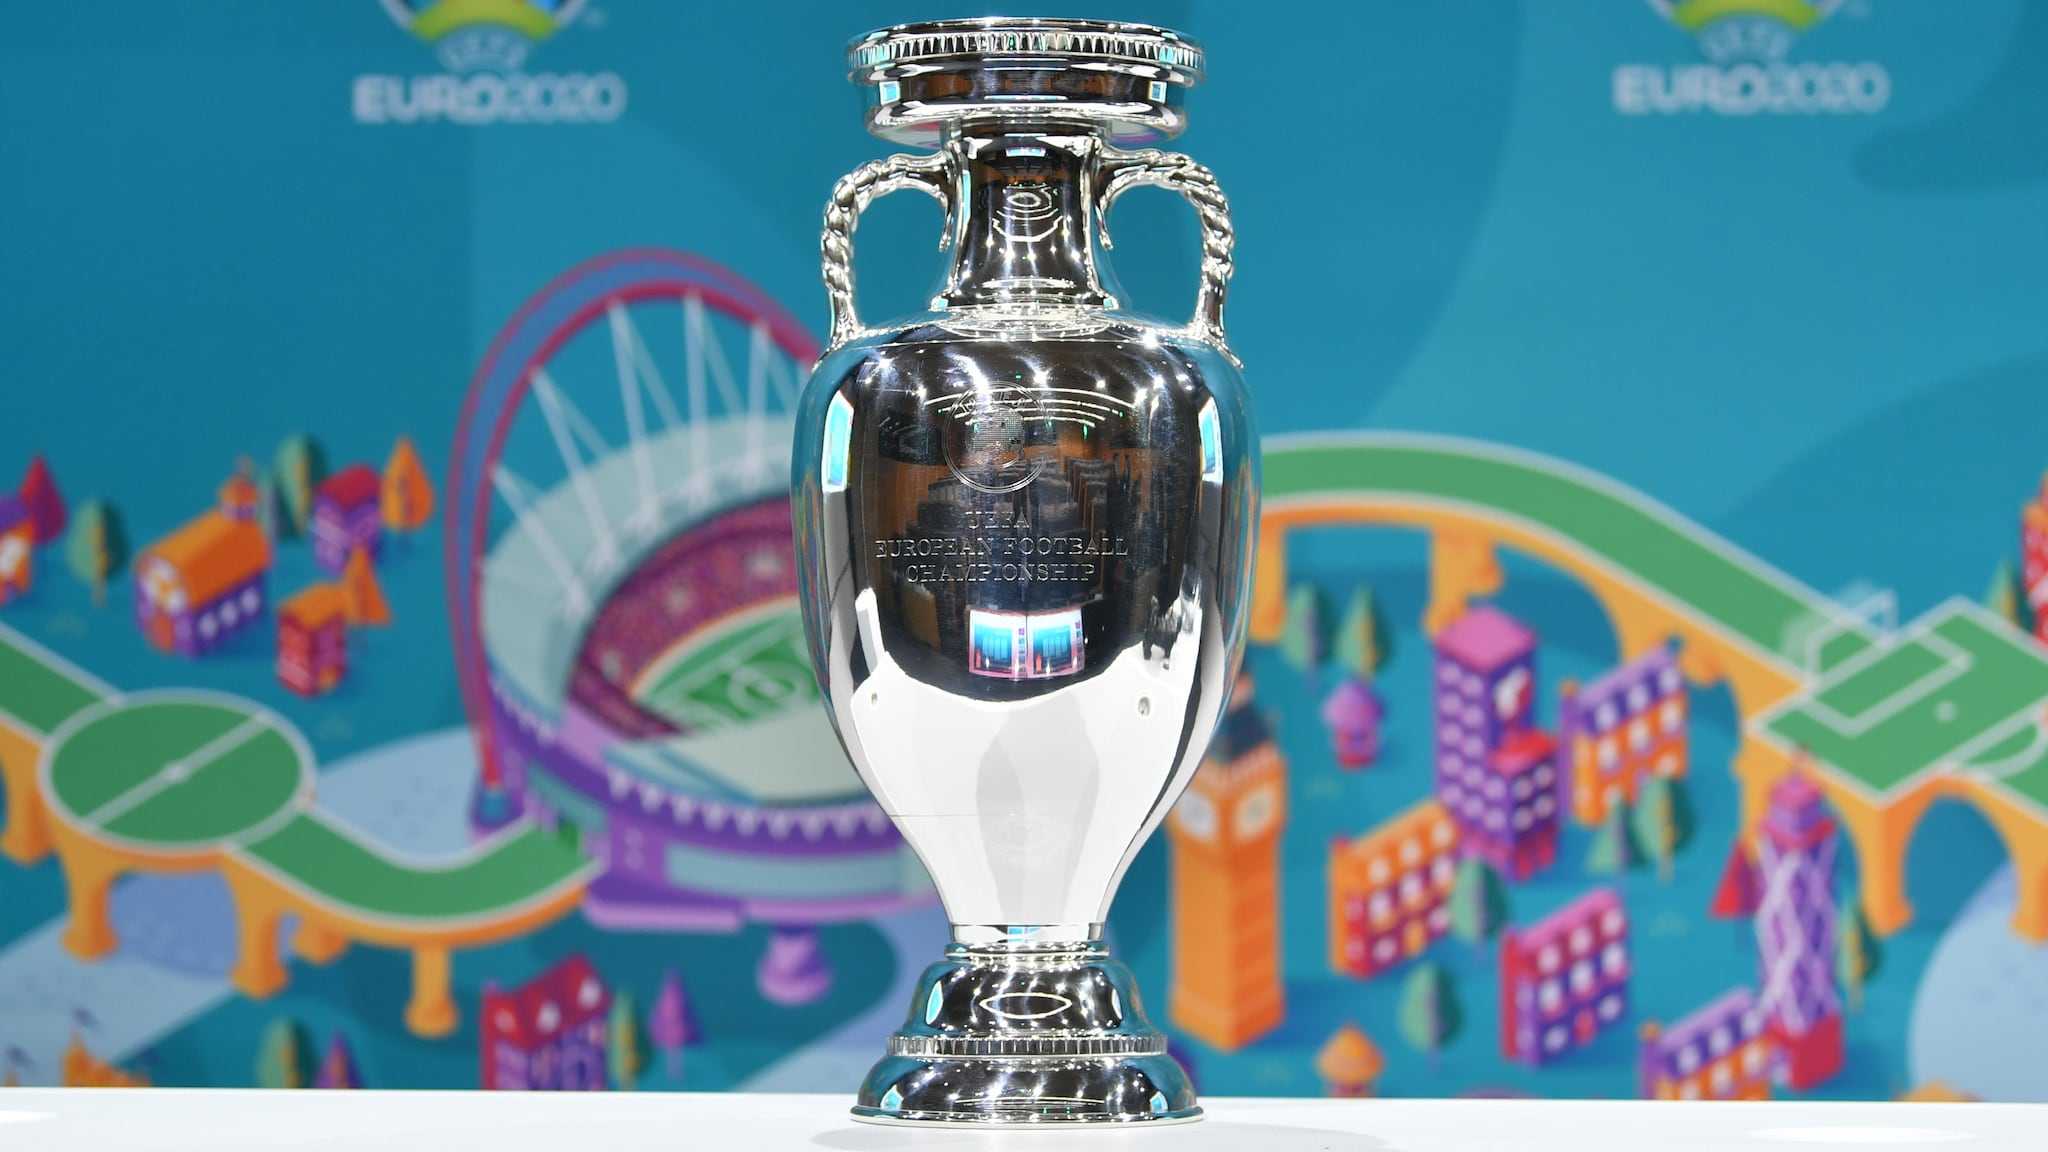 Venue changes announced for some UEFA EURO 2020 matches